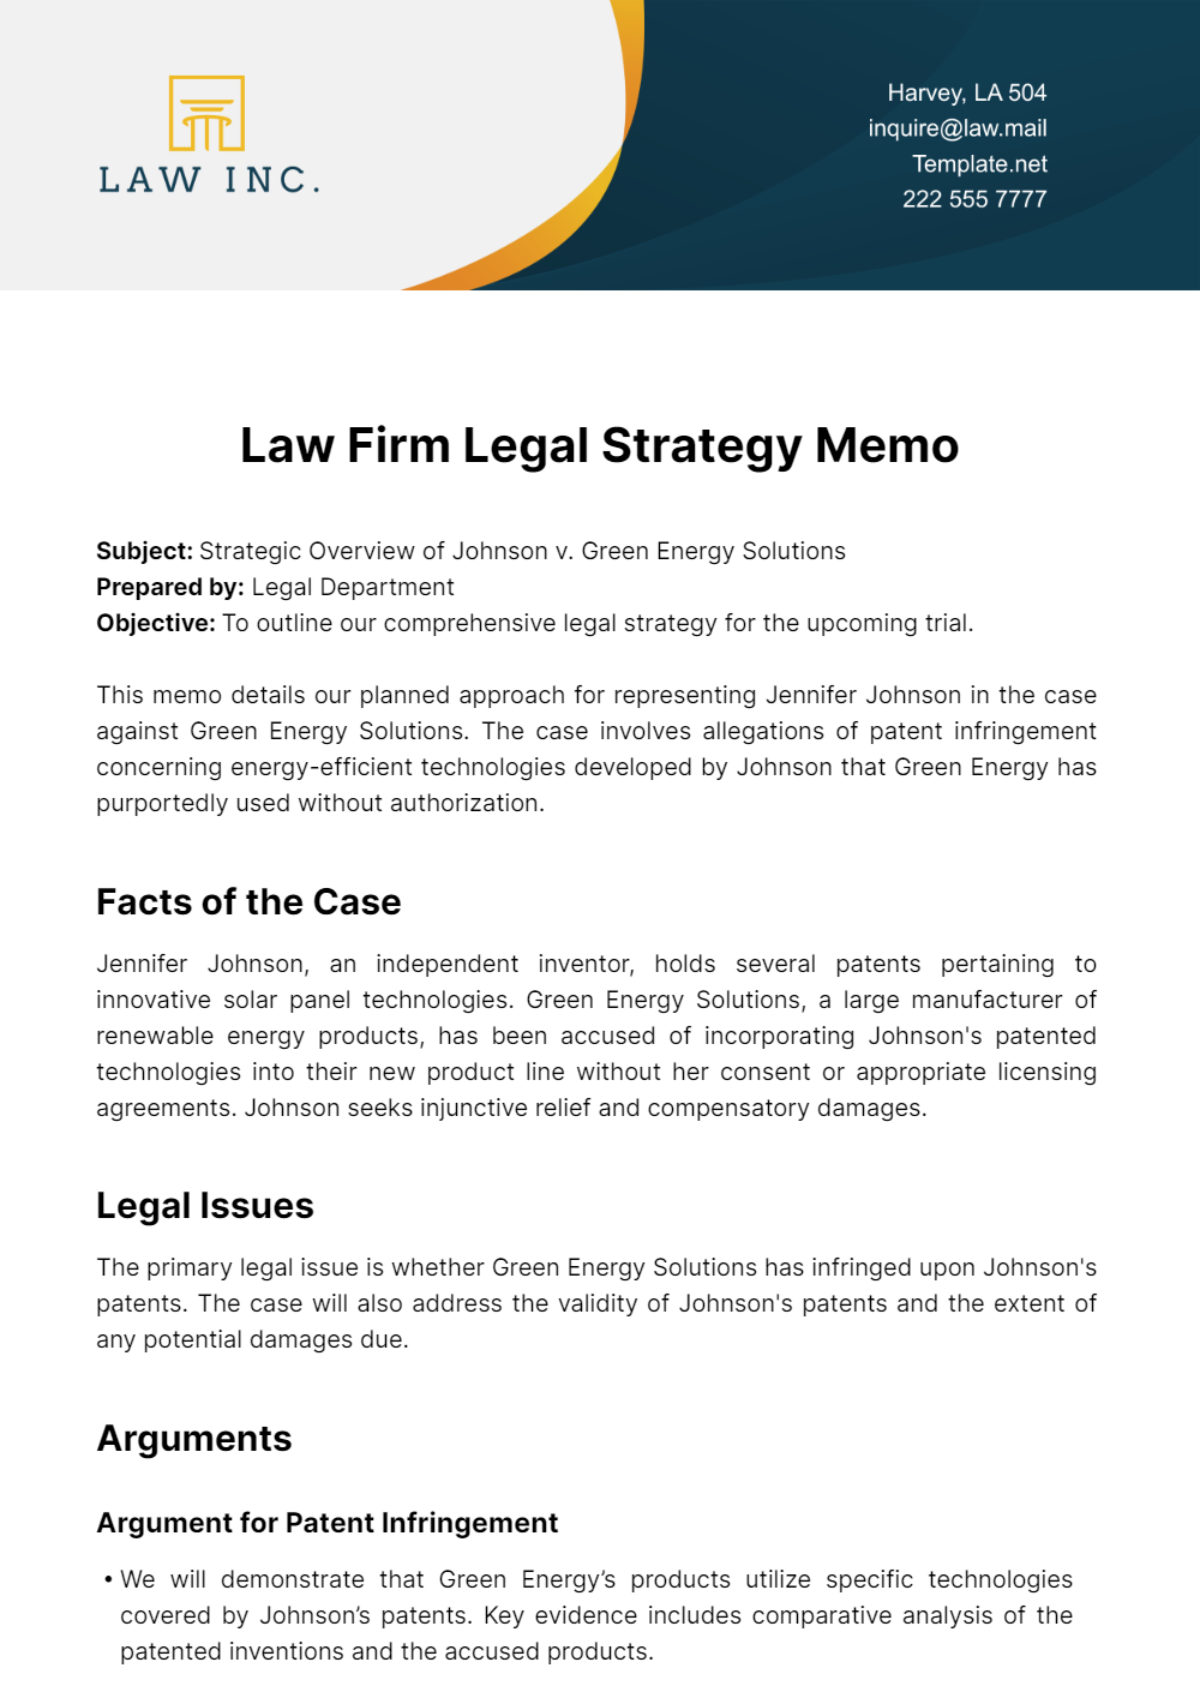 Free Law Firm Legal Strategy Memo Template